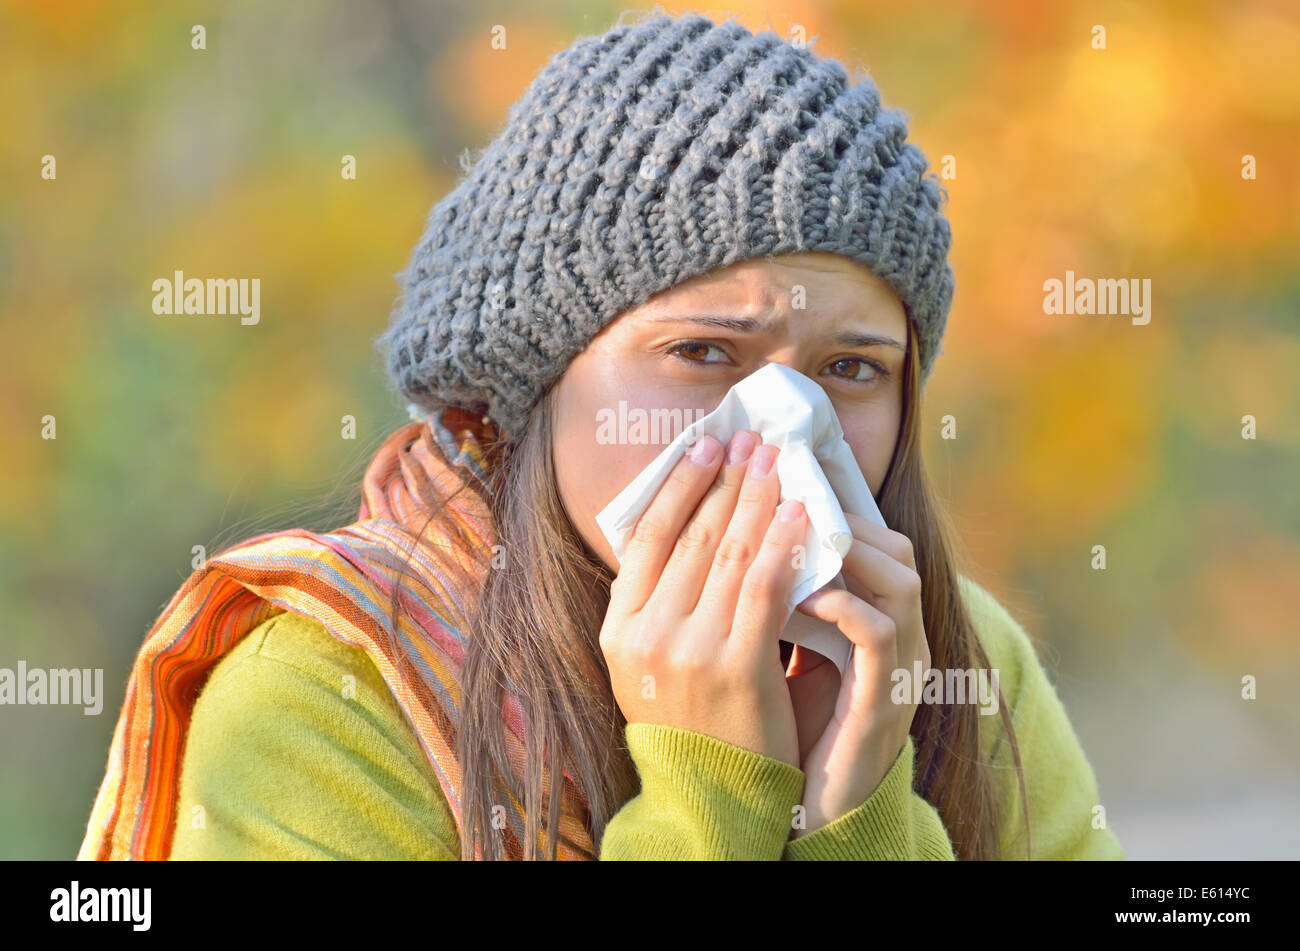 Sick young model isolated on autumn background blowing her nose Stock Photo